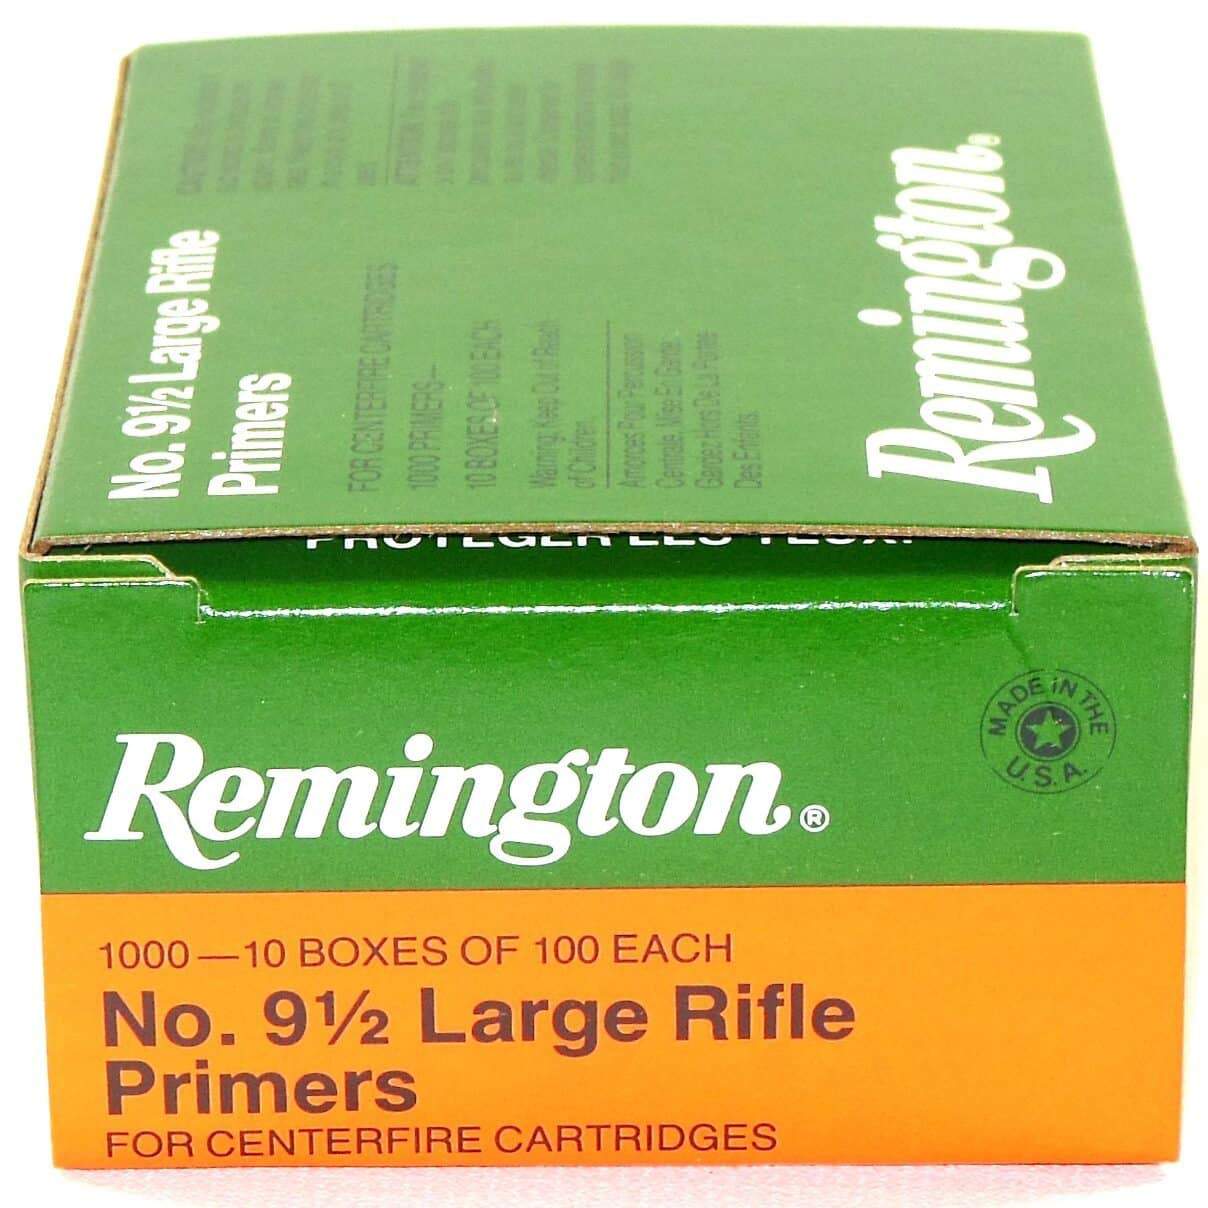 Featured image for “Remington 912 Large Rifle Primers”